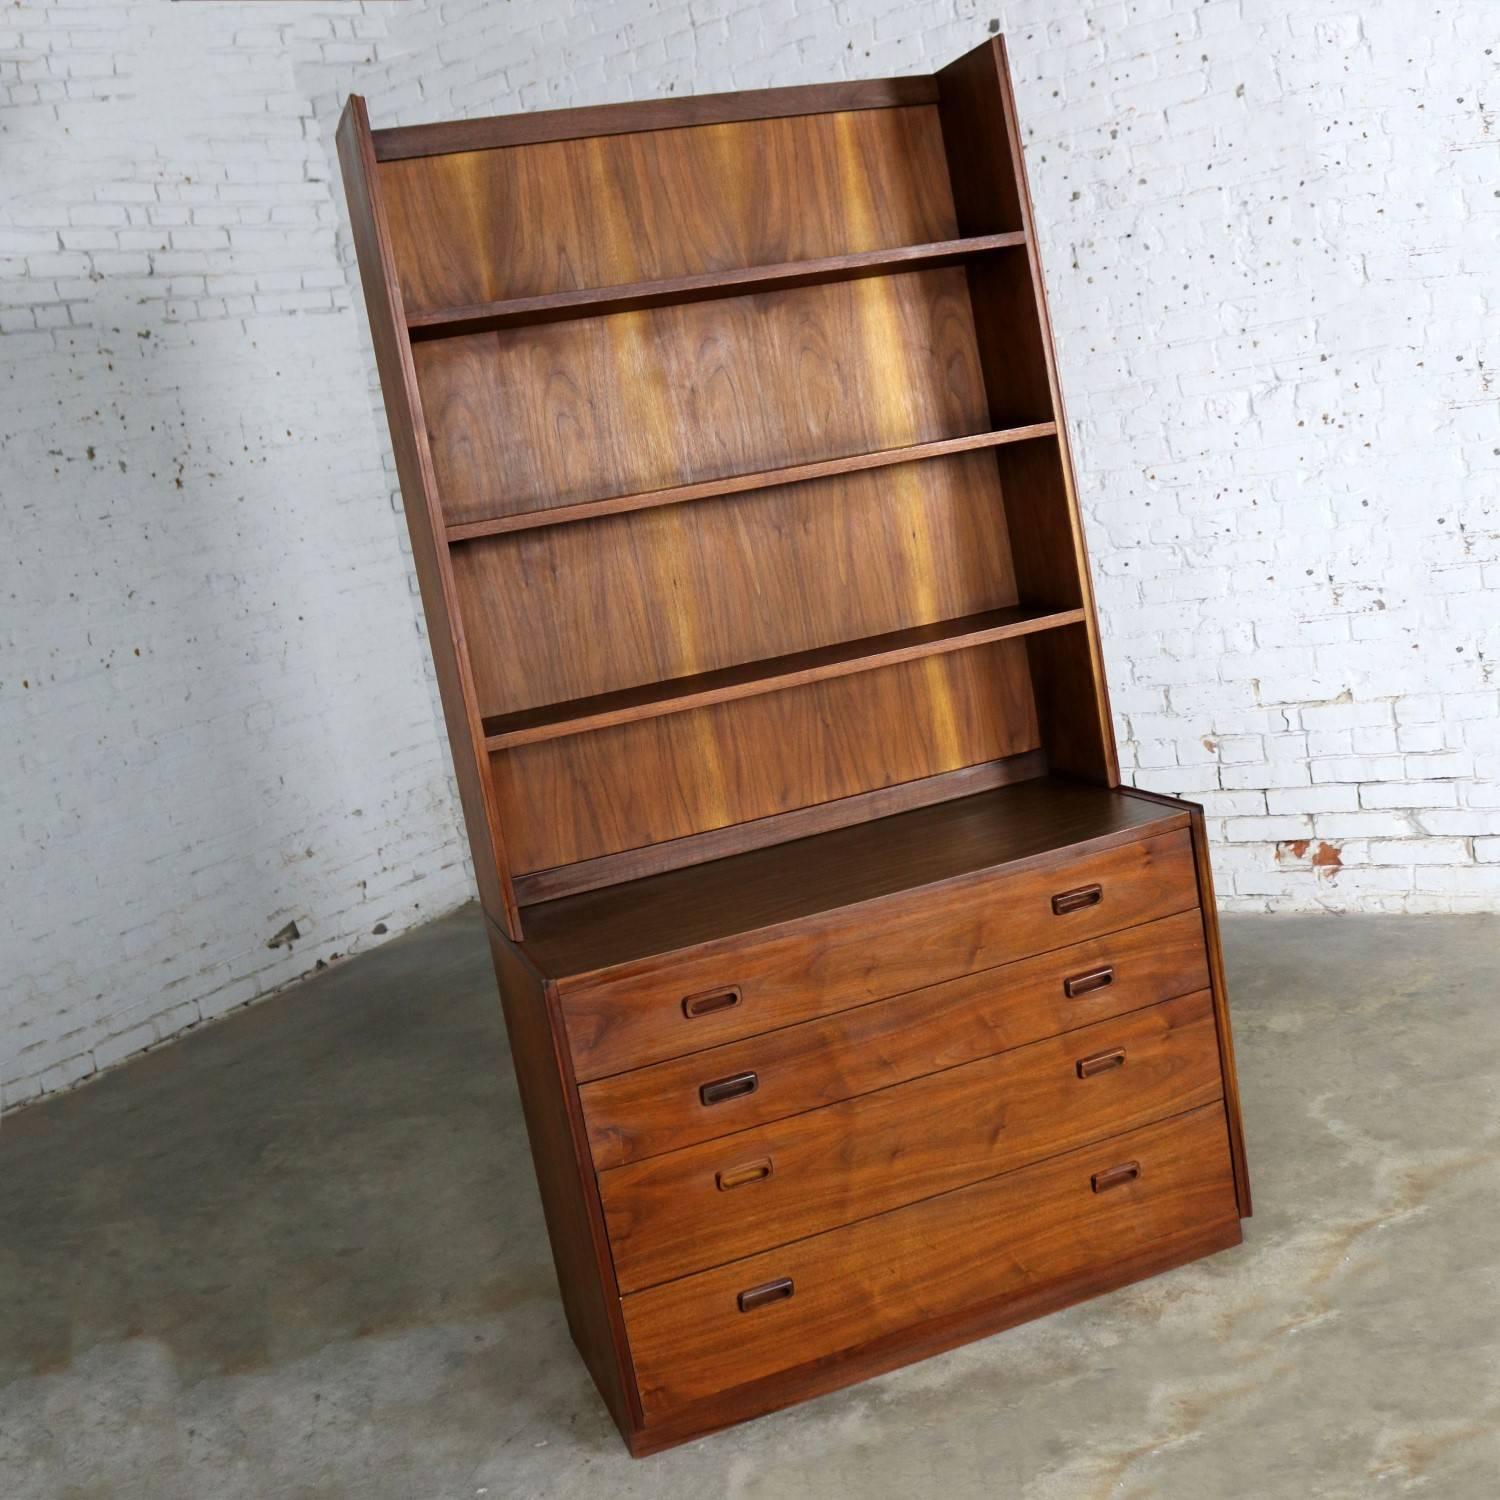 Mid-Century Modern Two-Piece Bookcase Display Cabinet Attributed to Founders Furniture Midcentury